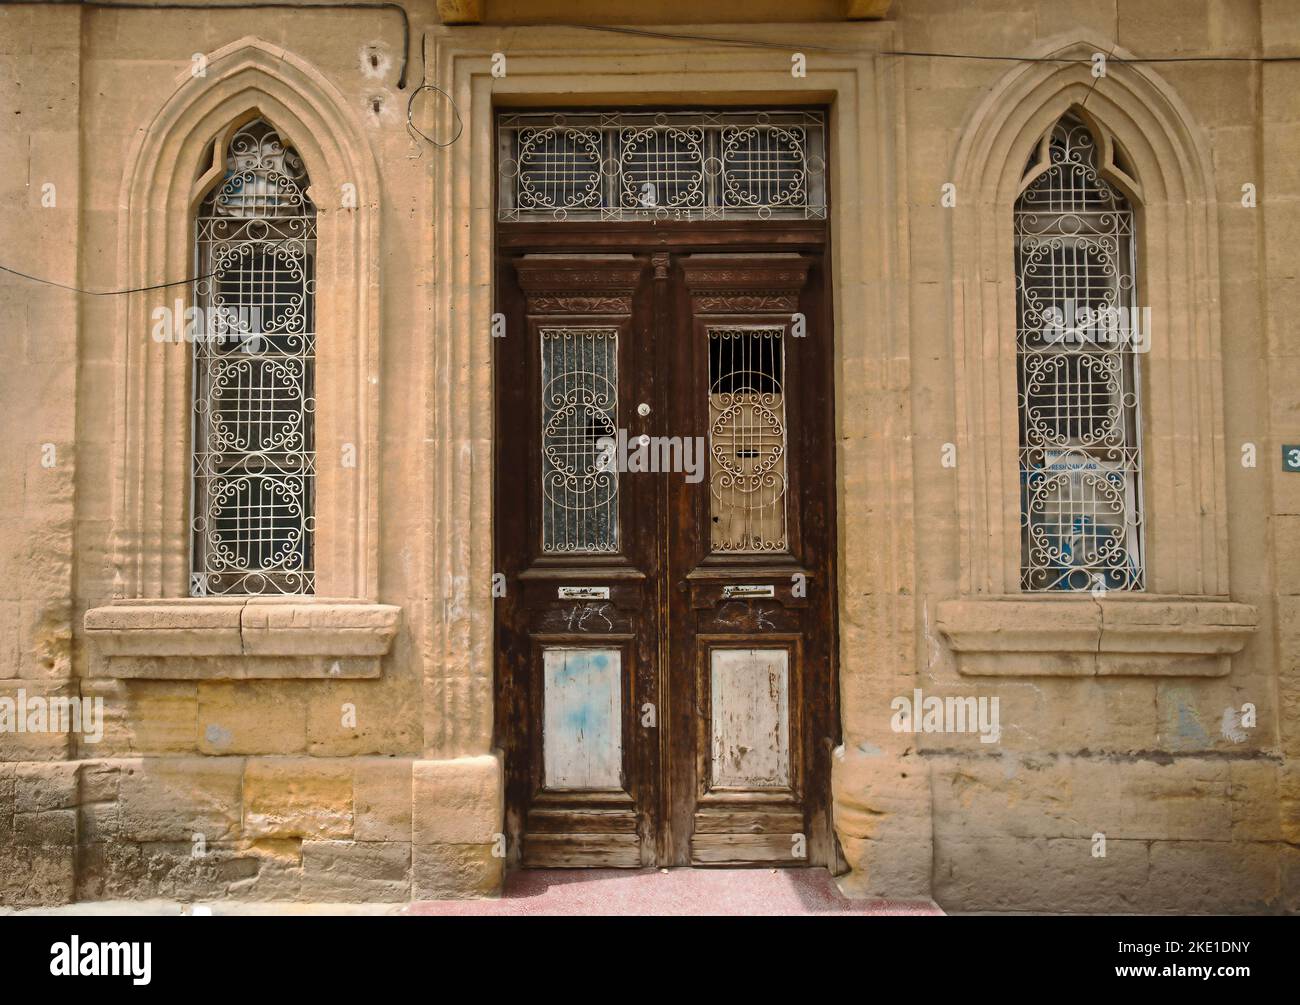 Historical images of old doorways and doors in in Turkish occupied Nicosia Stock Photo